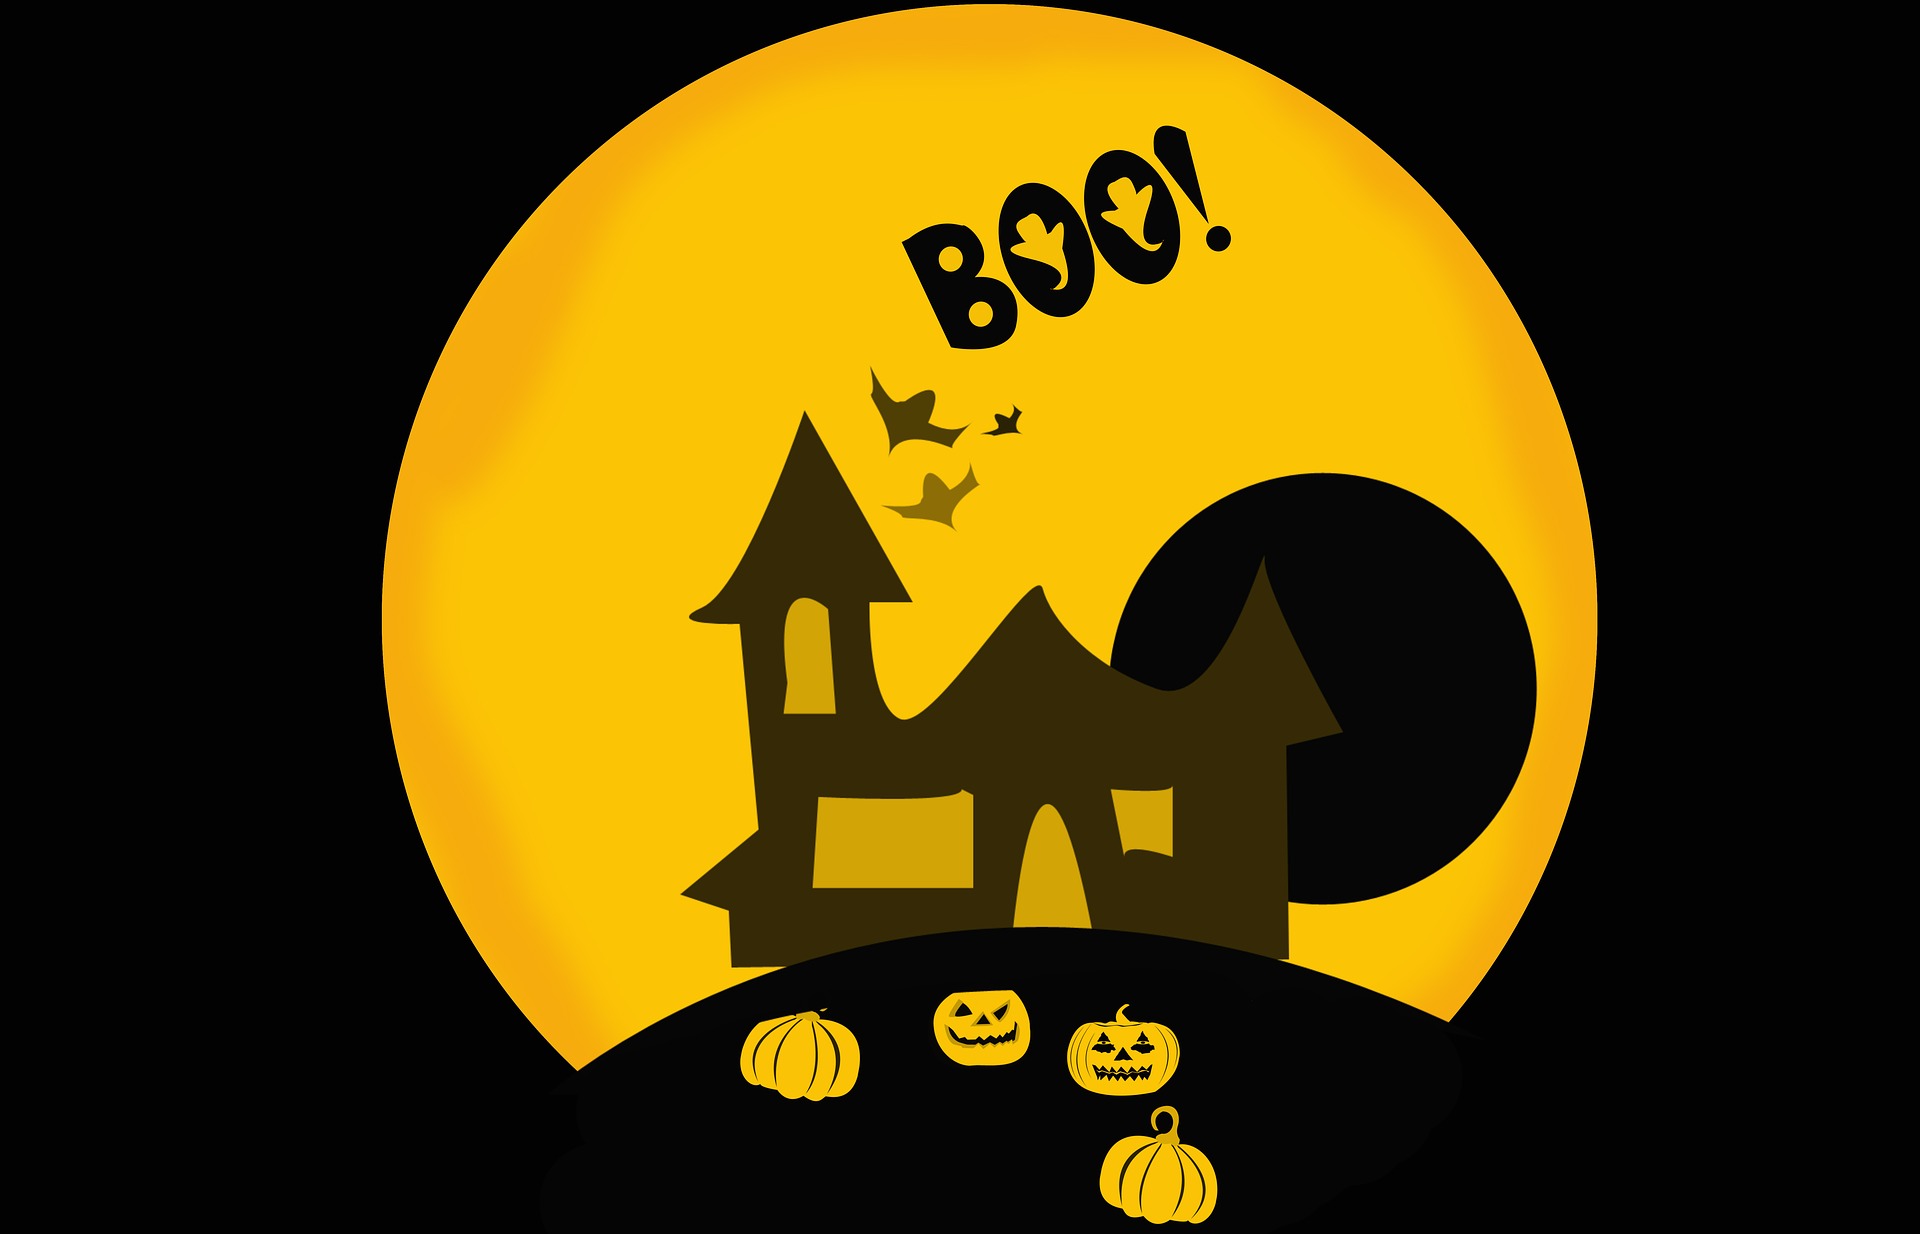 #Halloween: 50% On New Web Hosting Services